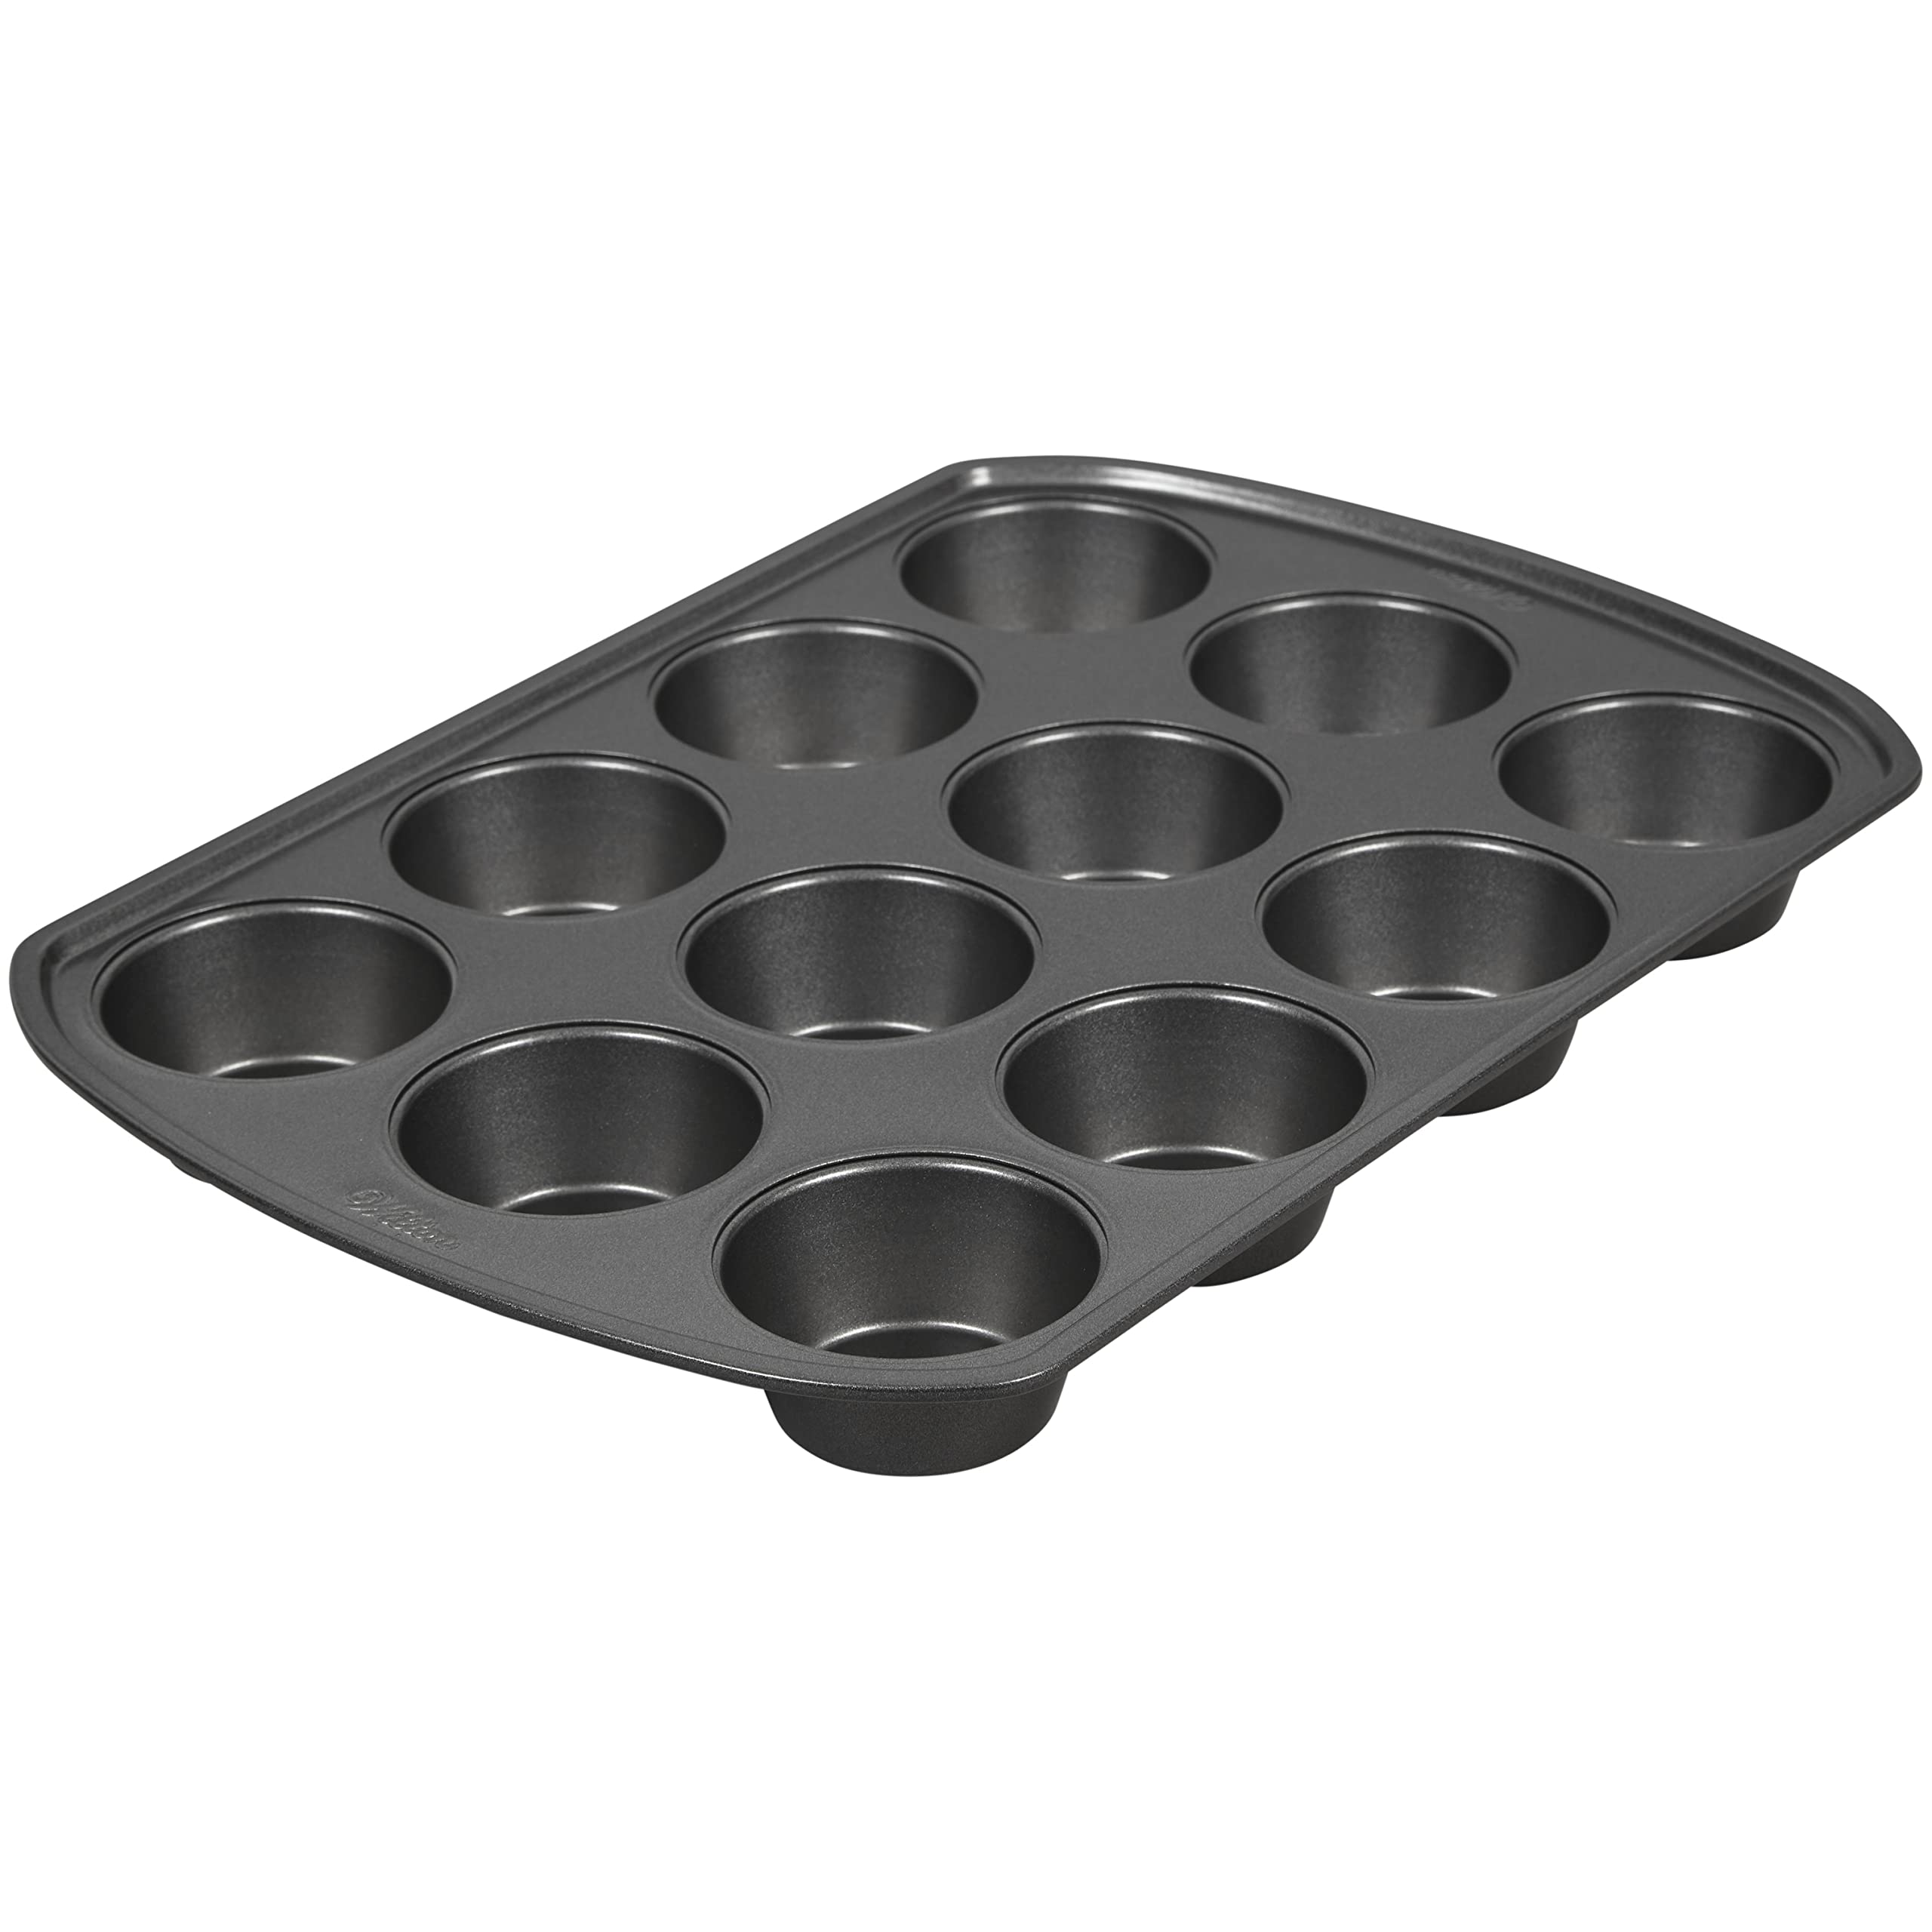 Wilton Perfect Results Premium Nonstick Bakeware Essentials Set - Perfect for Everyday Use and Baking Cookies, Cupcakes, Cakes, Steel, 6-Piece